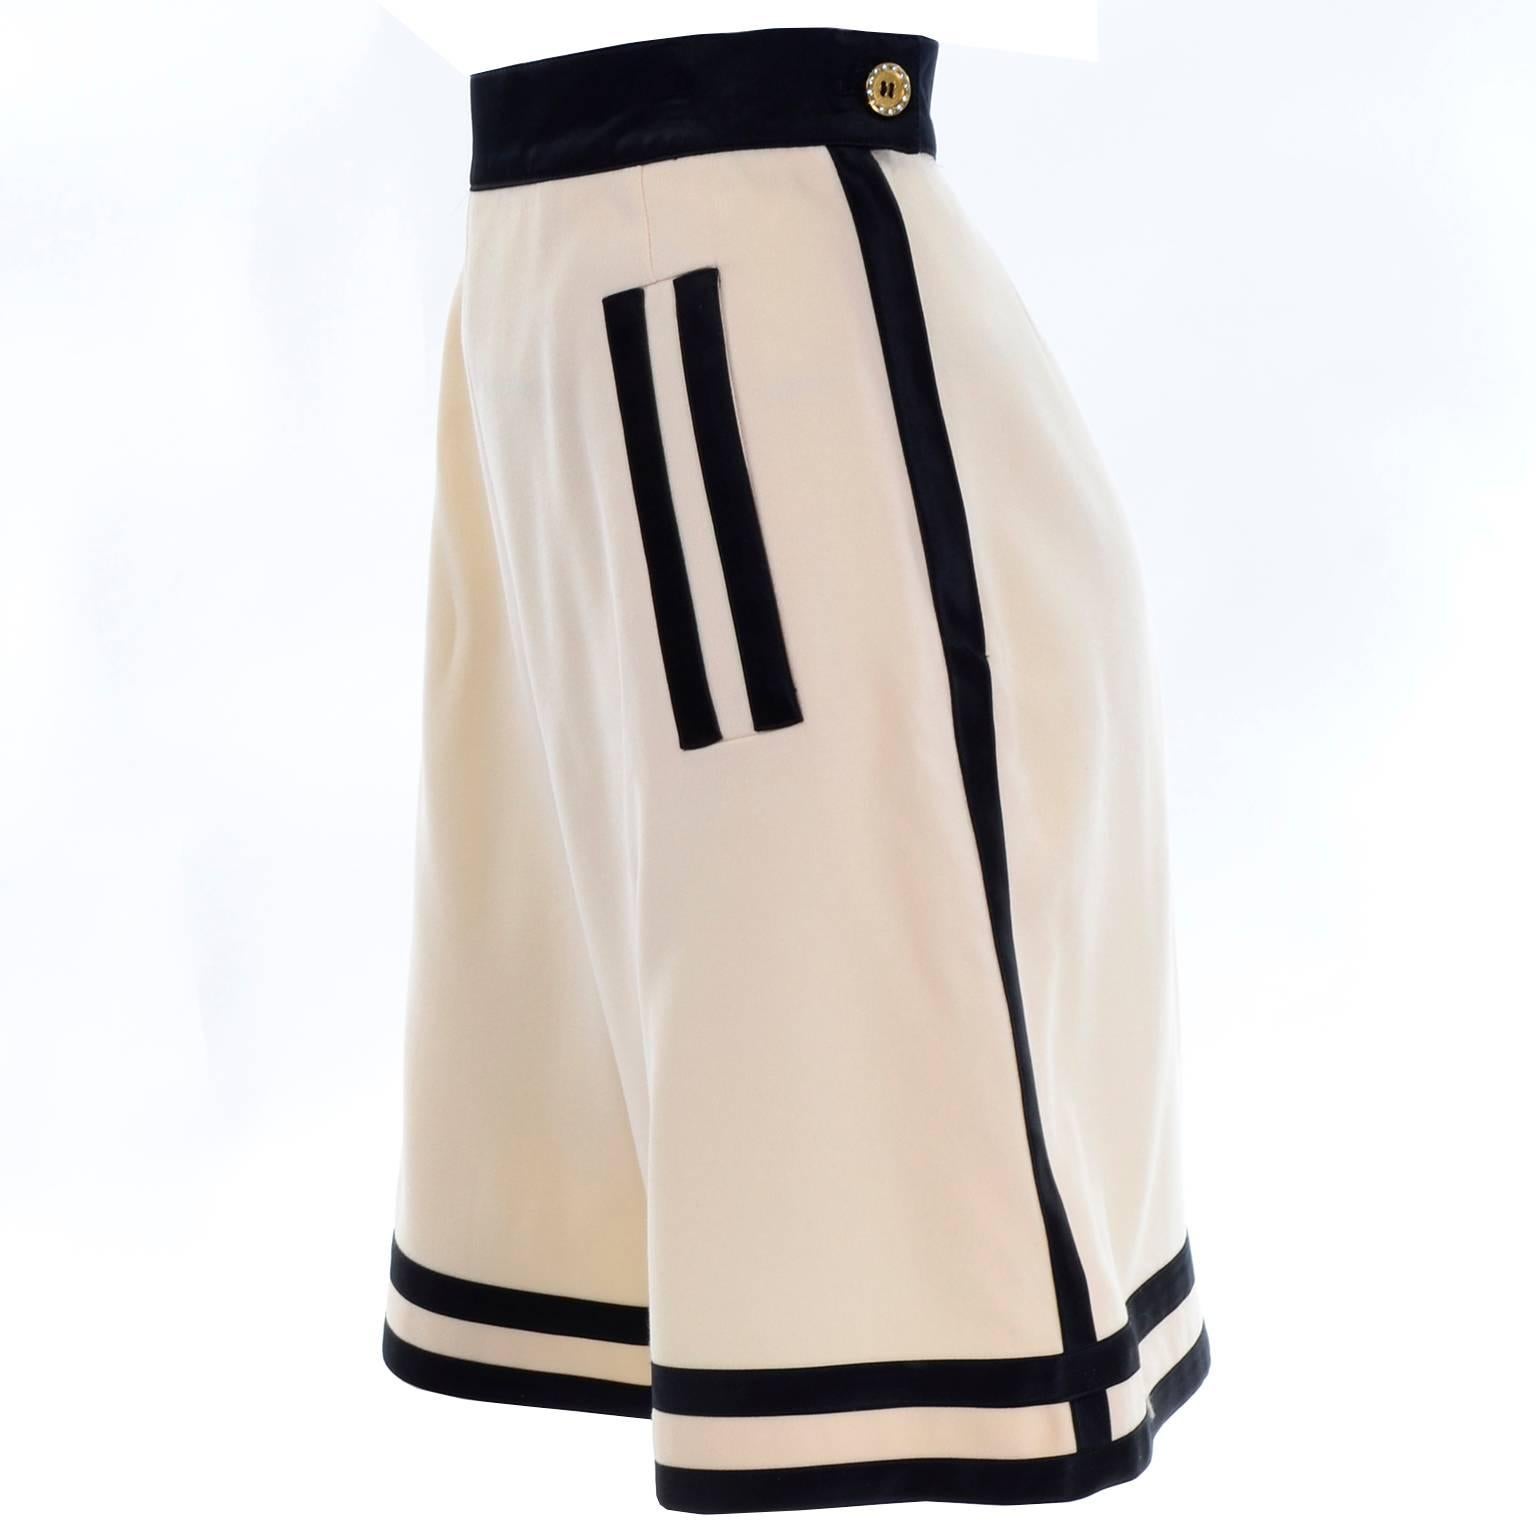 These fabulous high waisted vintage Escada Couture cream wool shorts have black satin stripe on the waistband and down the sides. These are perfect for Fall or Winter, and we love the way they fit!  There are also two black satin stripes on the side